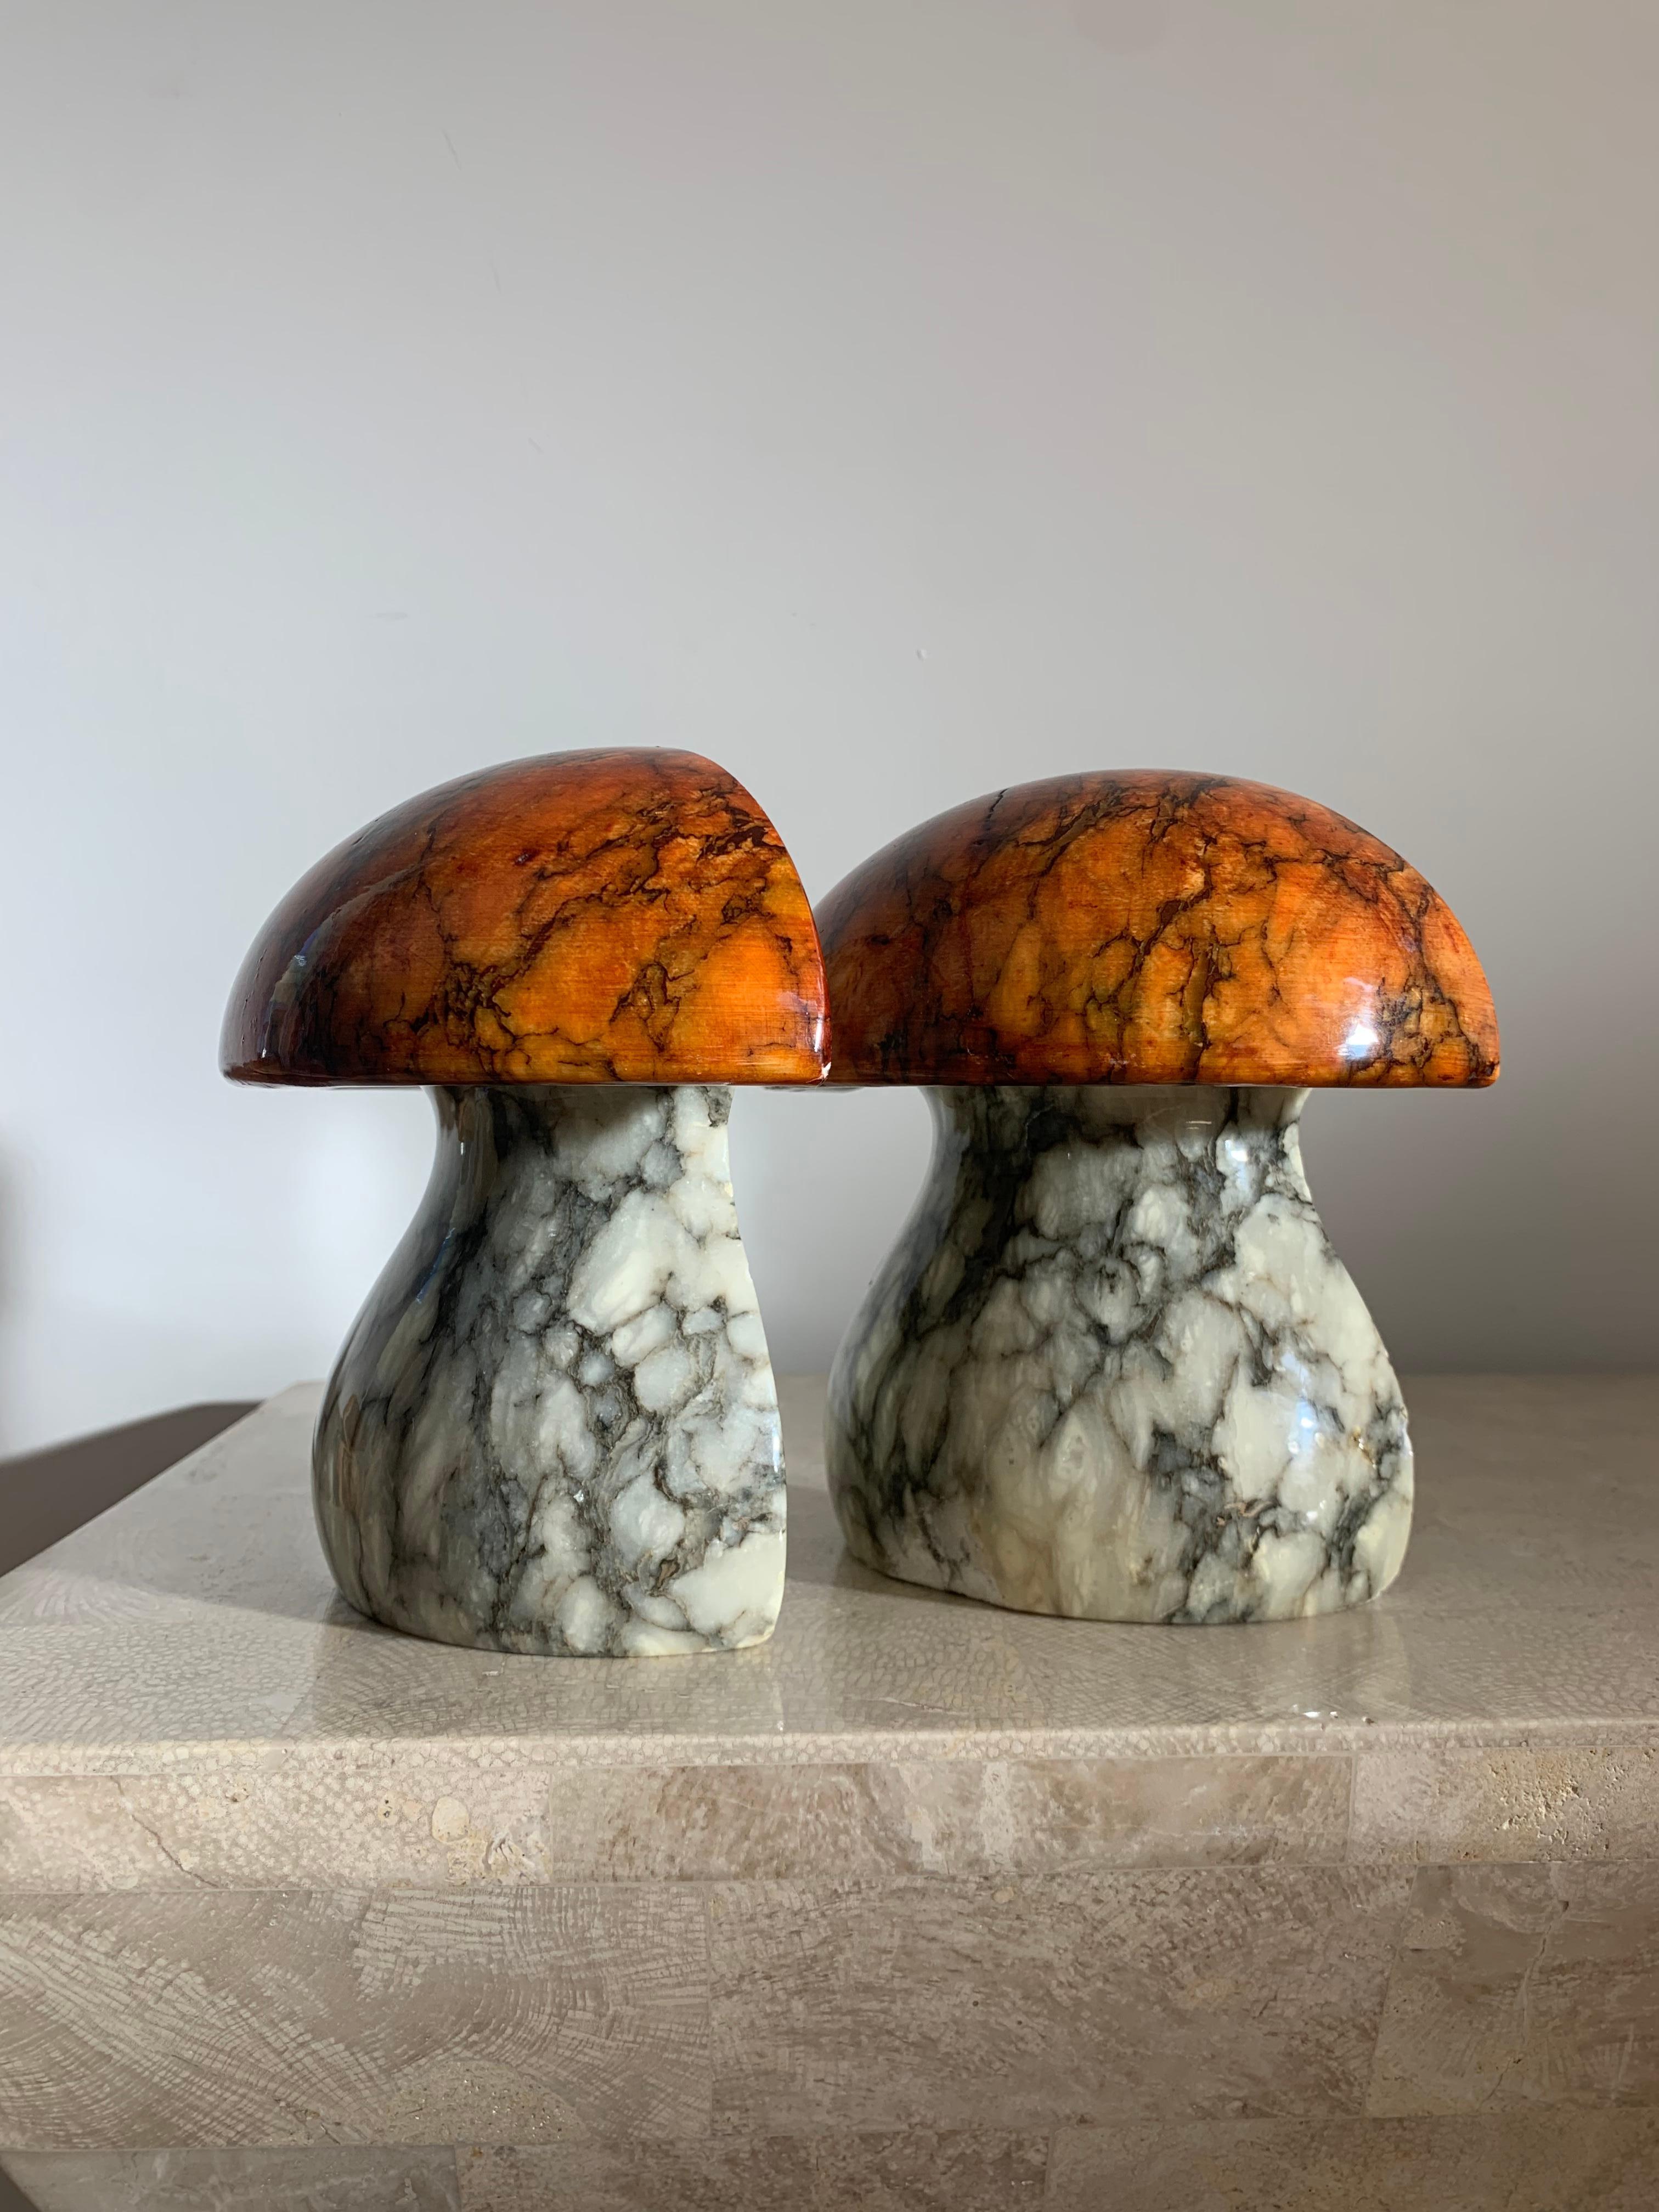 A rare pair of marble mushroom bookends by ABF, hand-carved in Italy 1960s. Sculptures / objets d’arts in their own right. Stems are ivory with ash veining, whilst caps are a brilliant coral red with charcoal veining. Minor losses as photos attest.